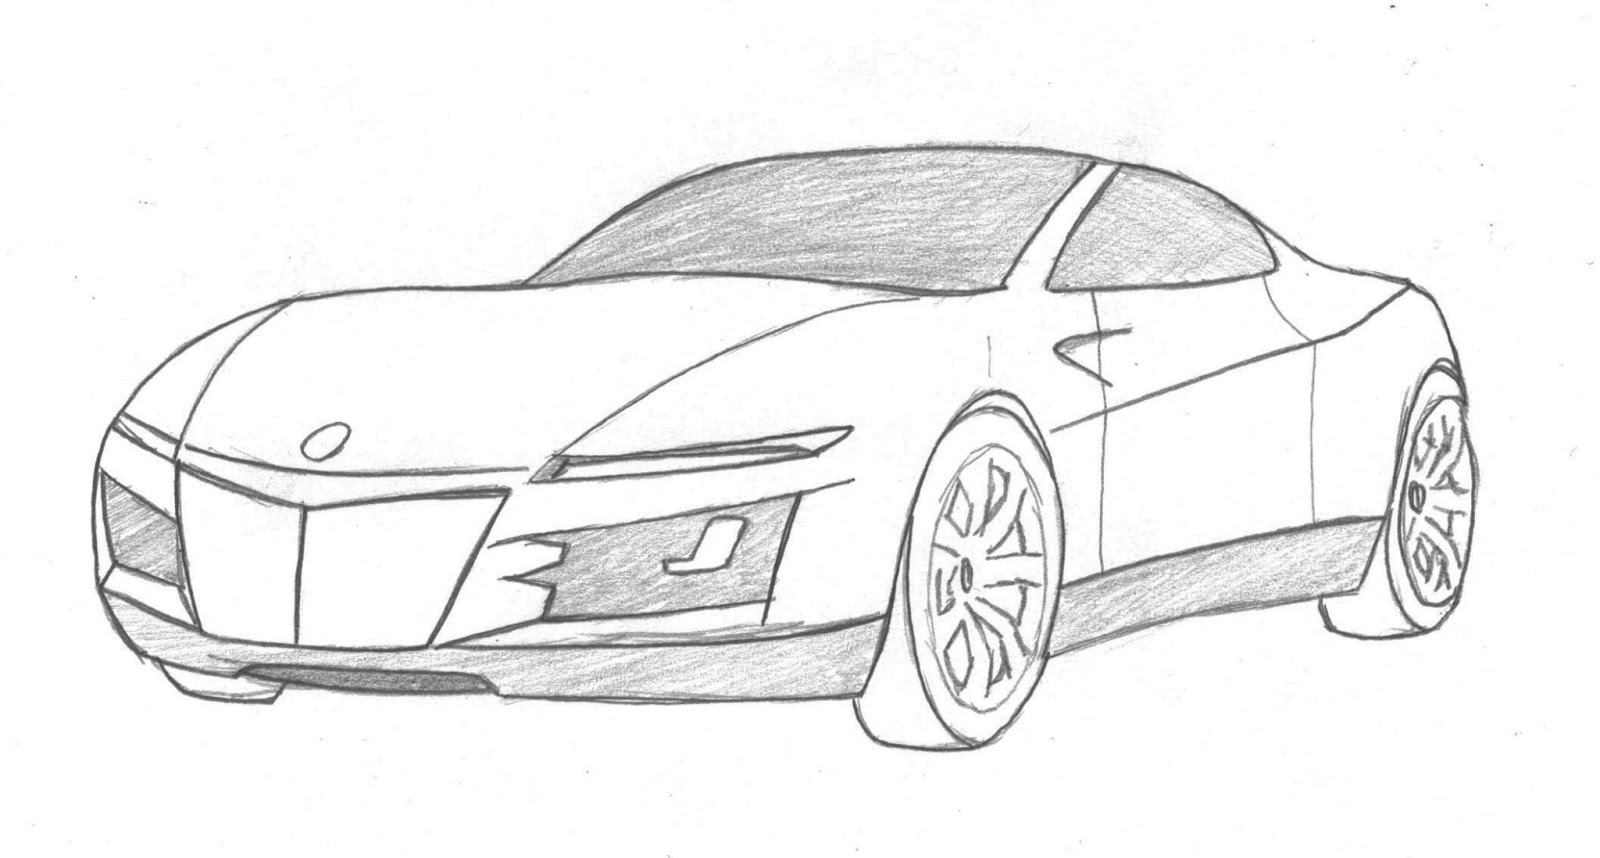 Car Design Drawings | Getting Creative with Line Weight